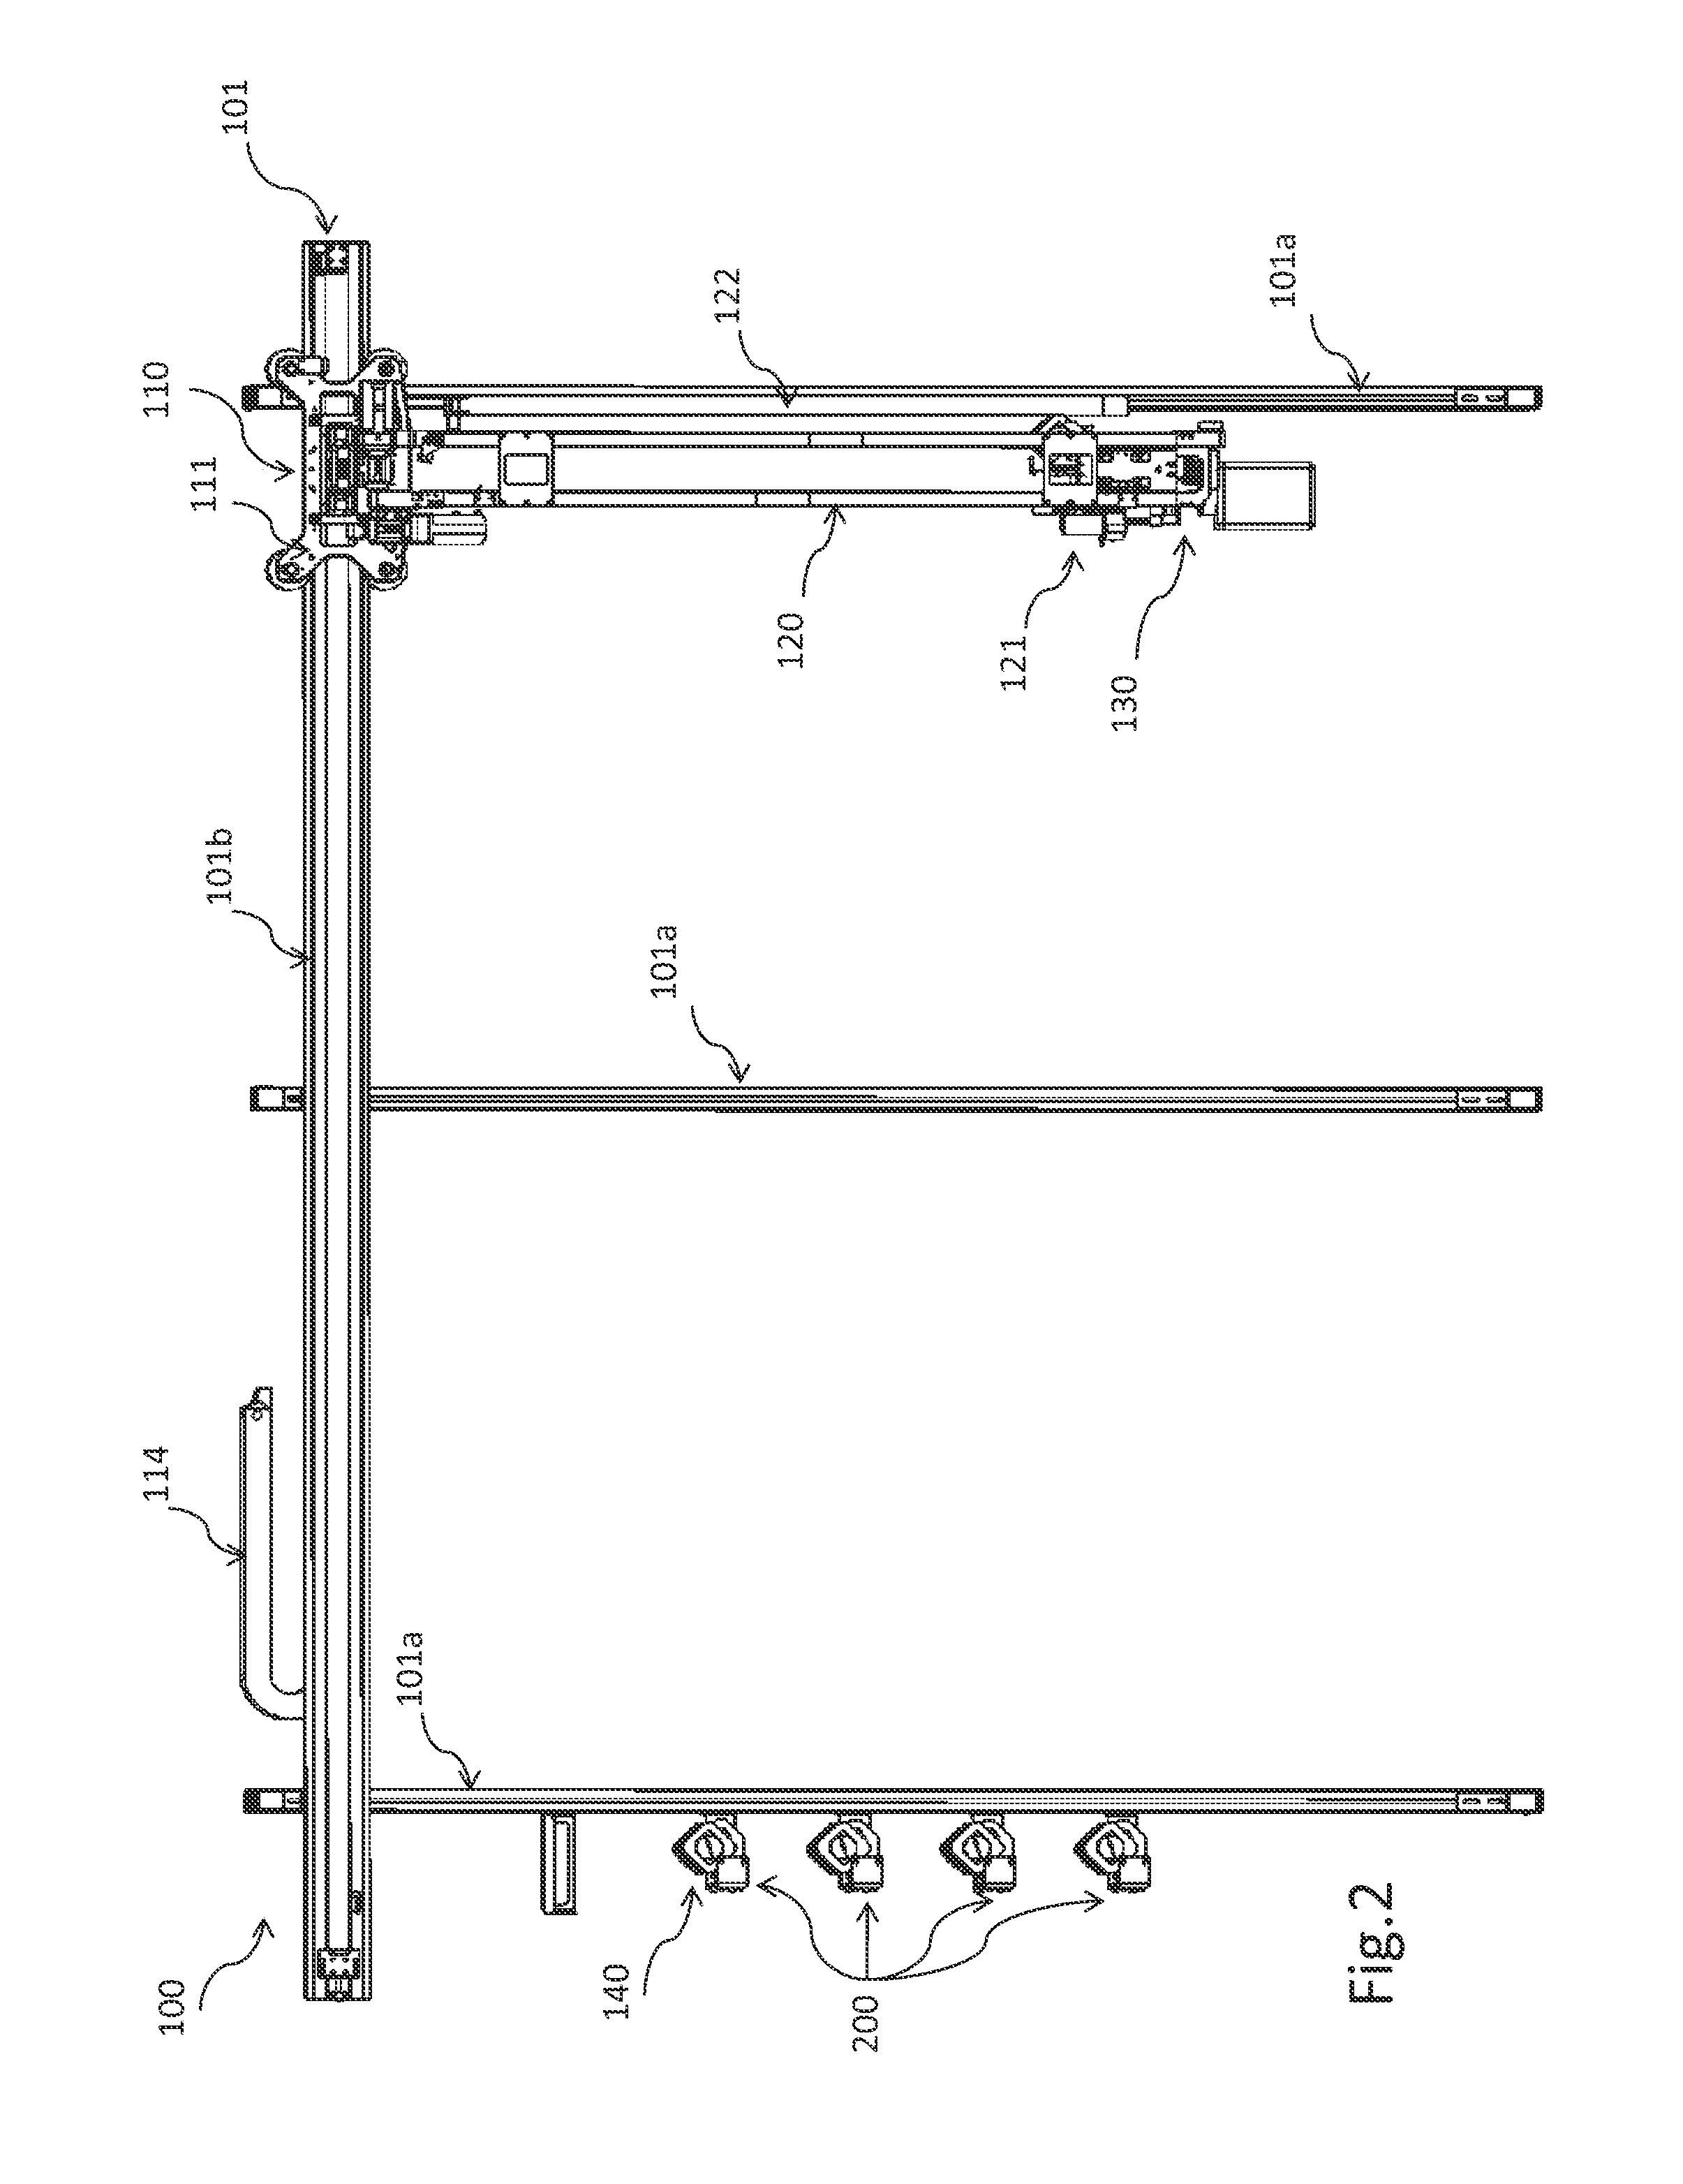 Automated system for controlled distribution of substances to animal containment devices in an animal housing facility